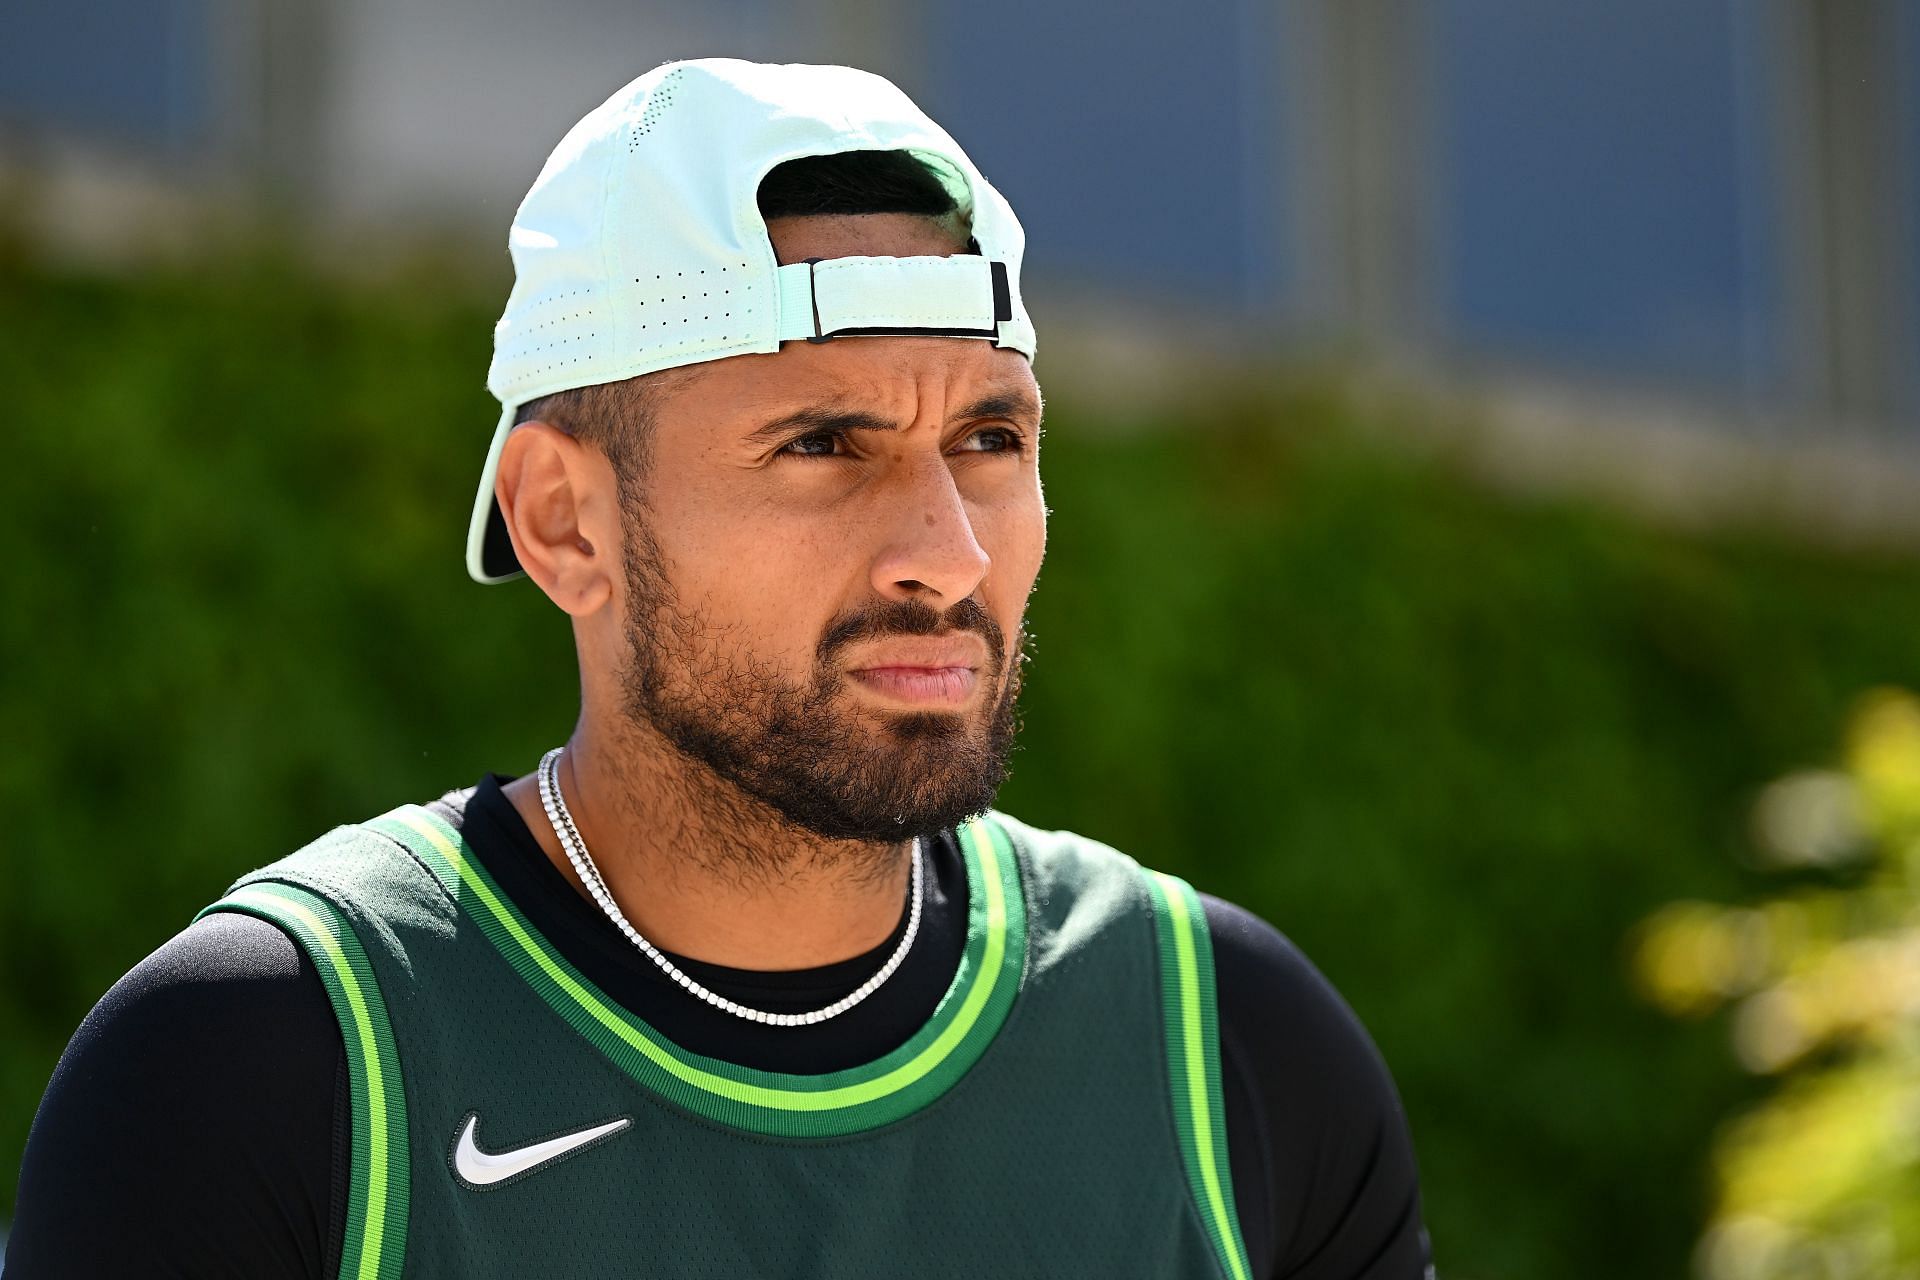 Nick Kyrgios is Rafael Nadal's opponent in the Wimbledon semi-final